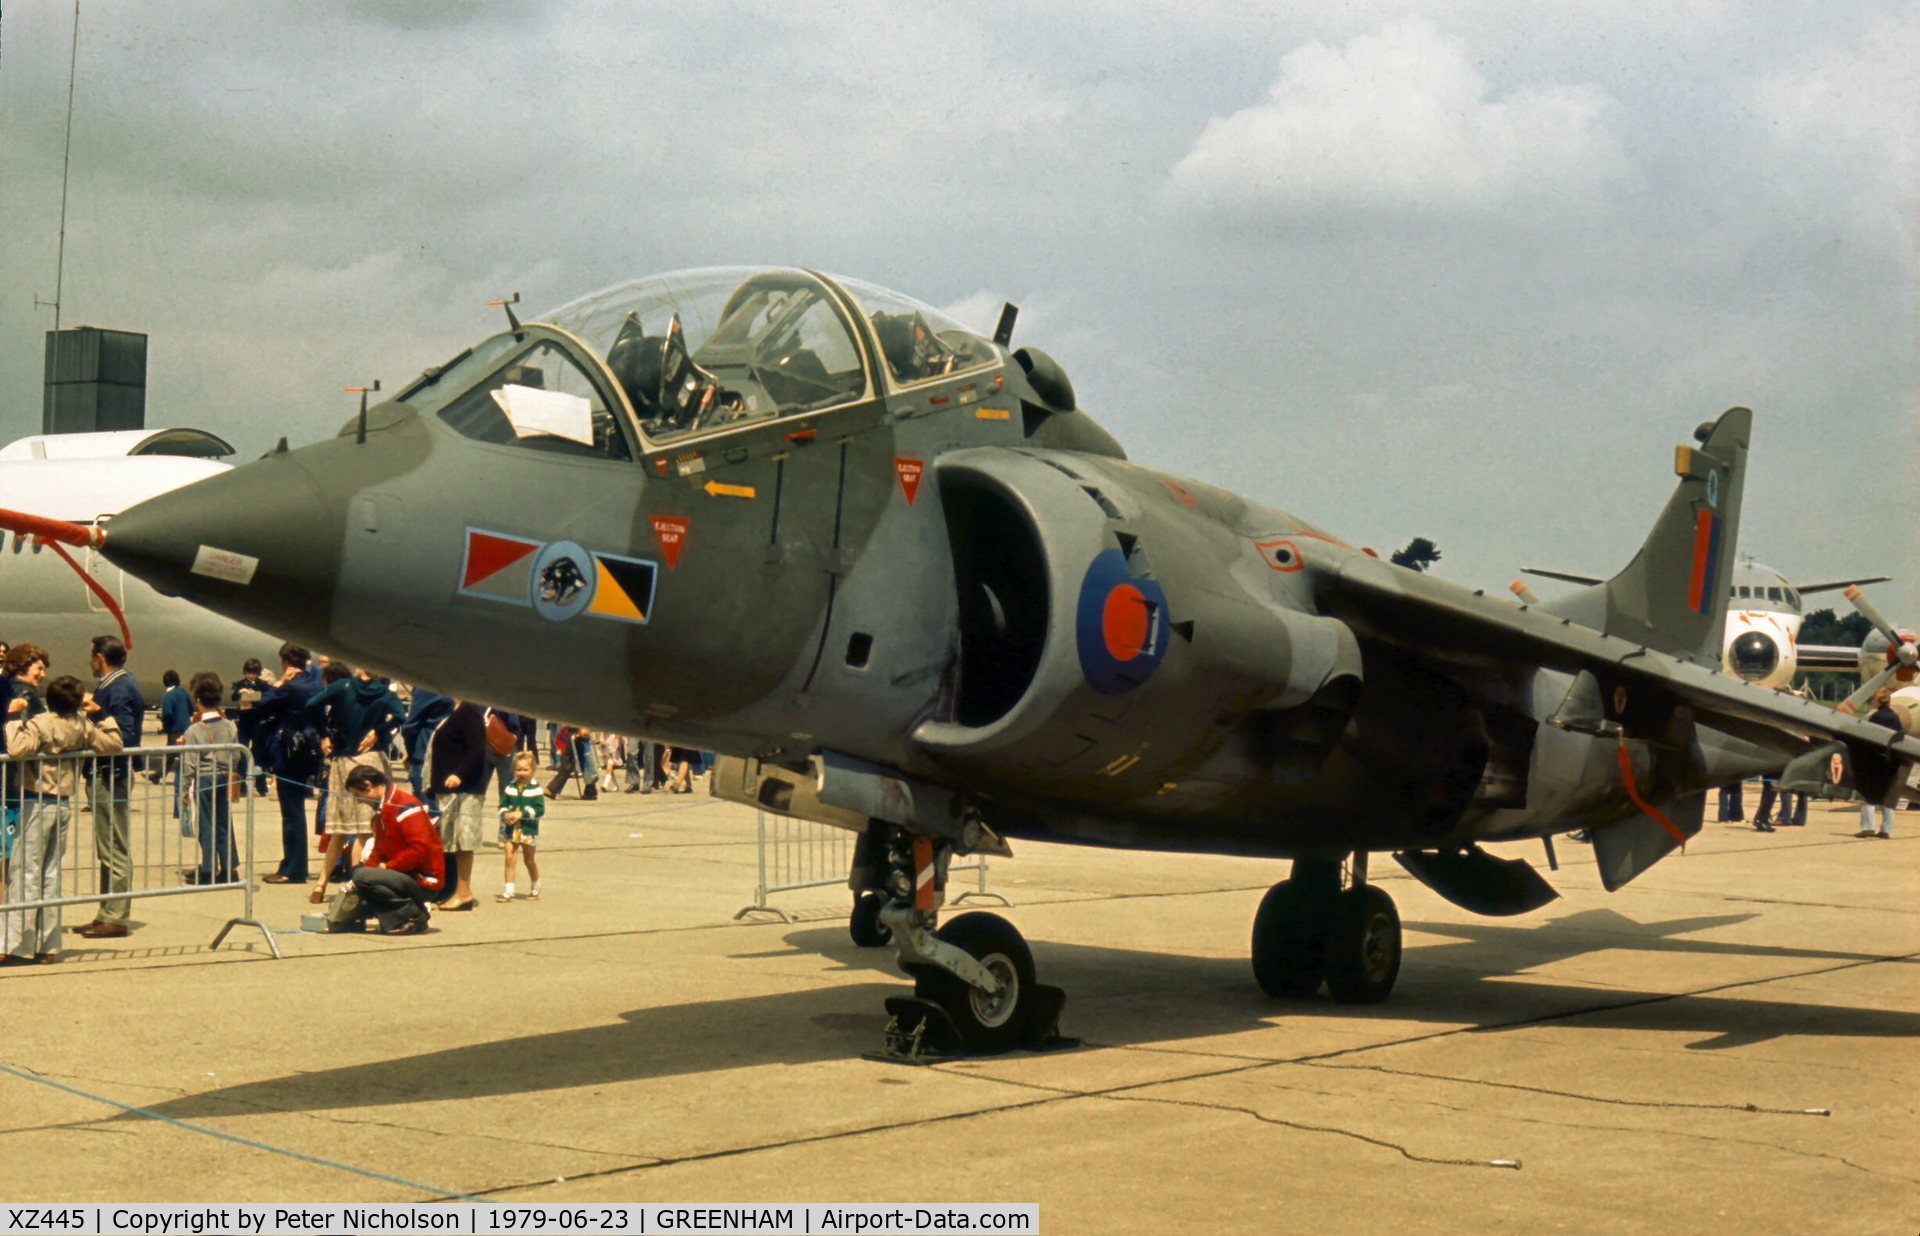 XZ445, 1979 British Aerospace Harrier T.4 C/N 212031, Harrier T.4 of 233 Operational Conversion Unit at RAF Wittering on display at the 1979 Intnl Air Tattoo at RAF Greenham Common.